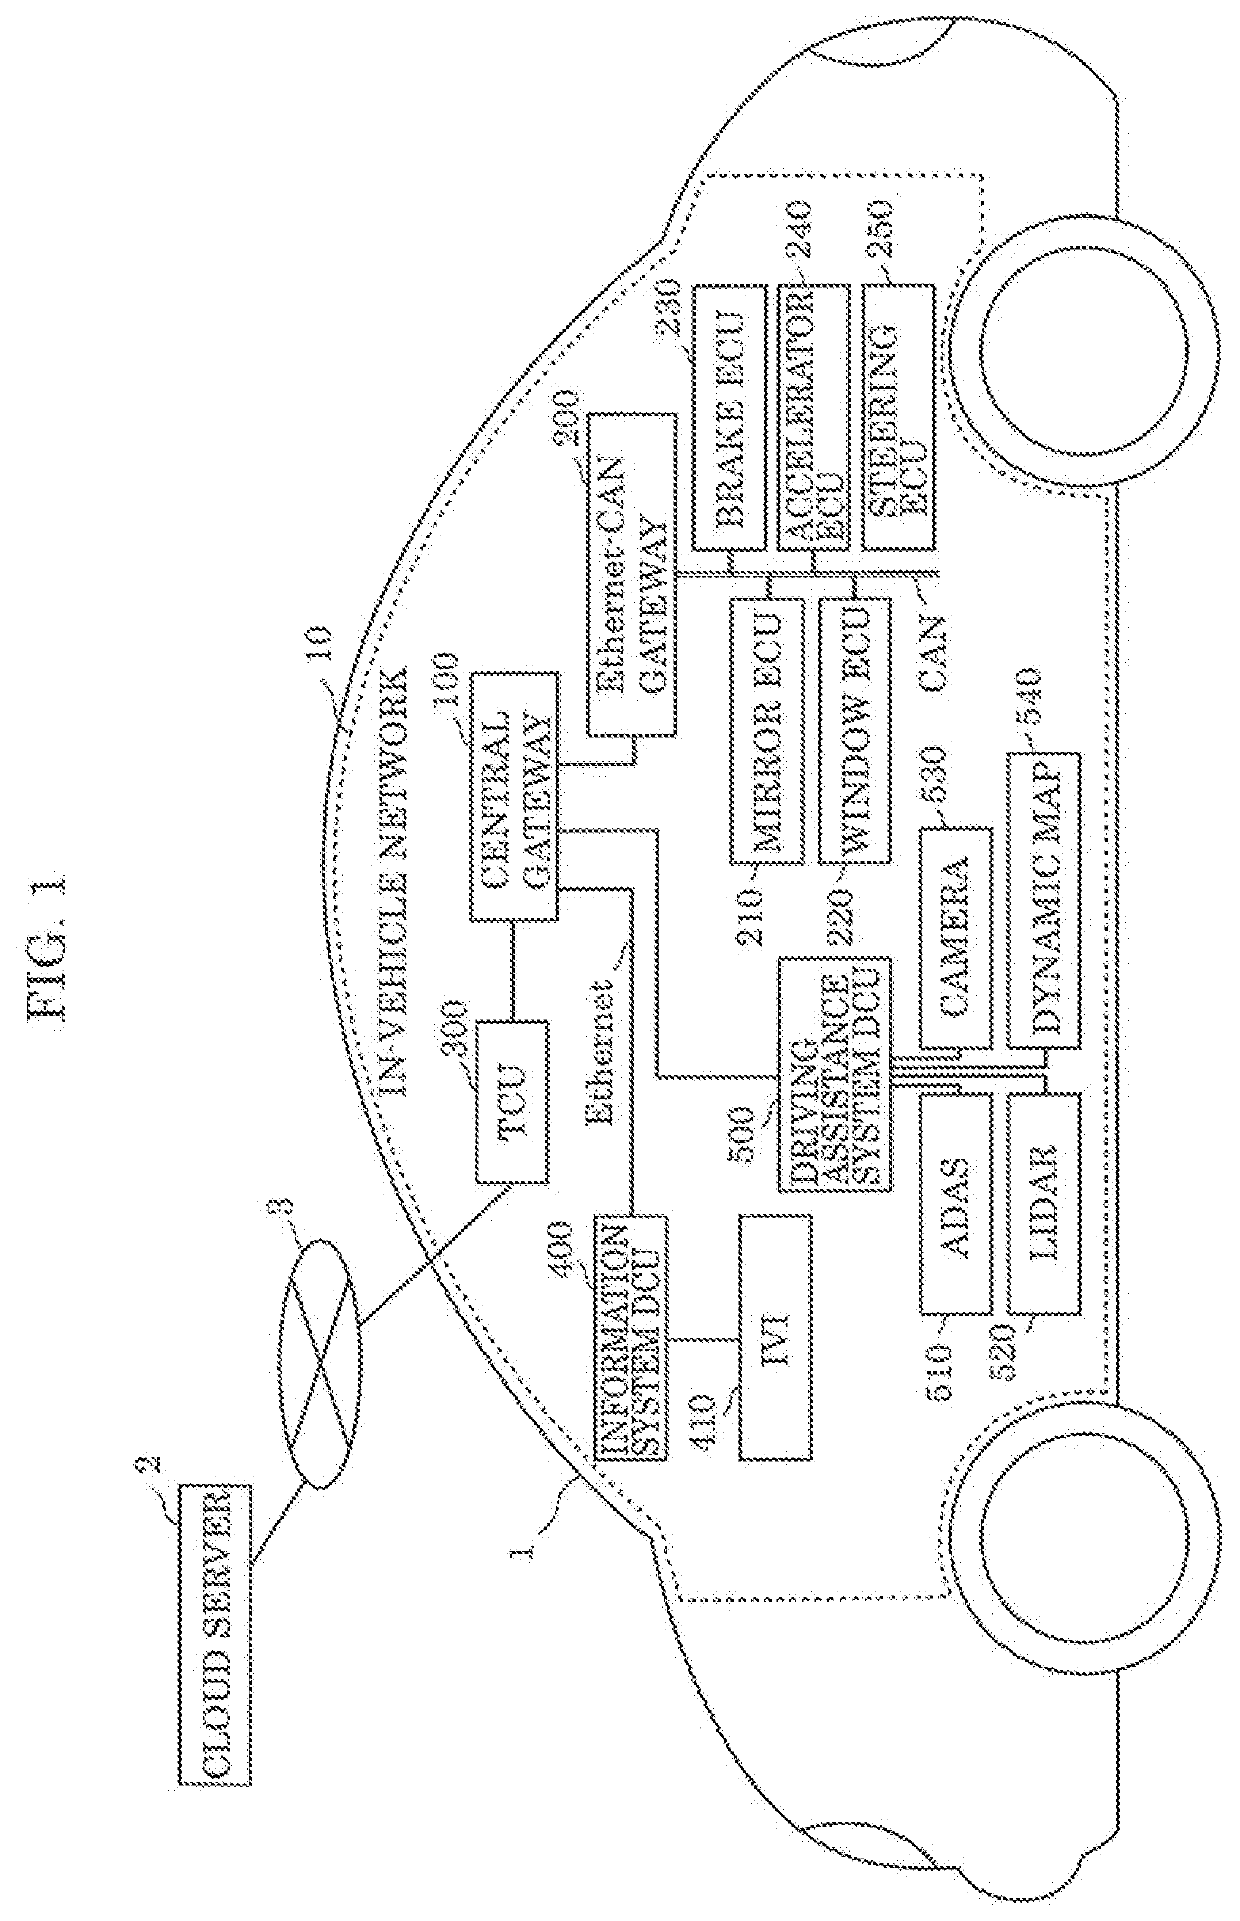 In-vehicle network anomaly detection system and in-vehicle network anomaly detection method